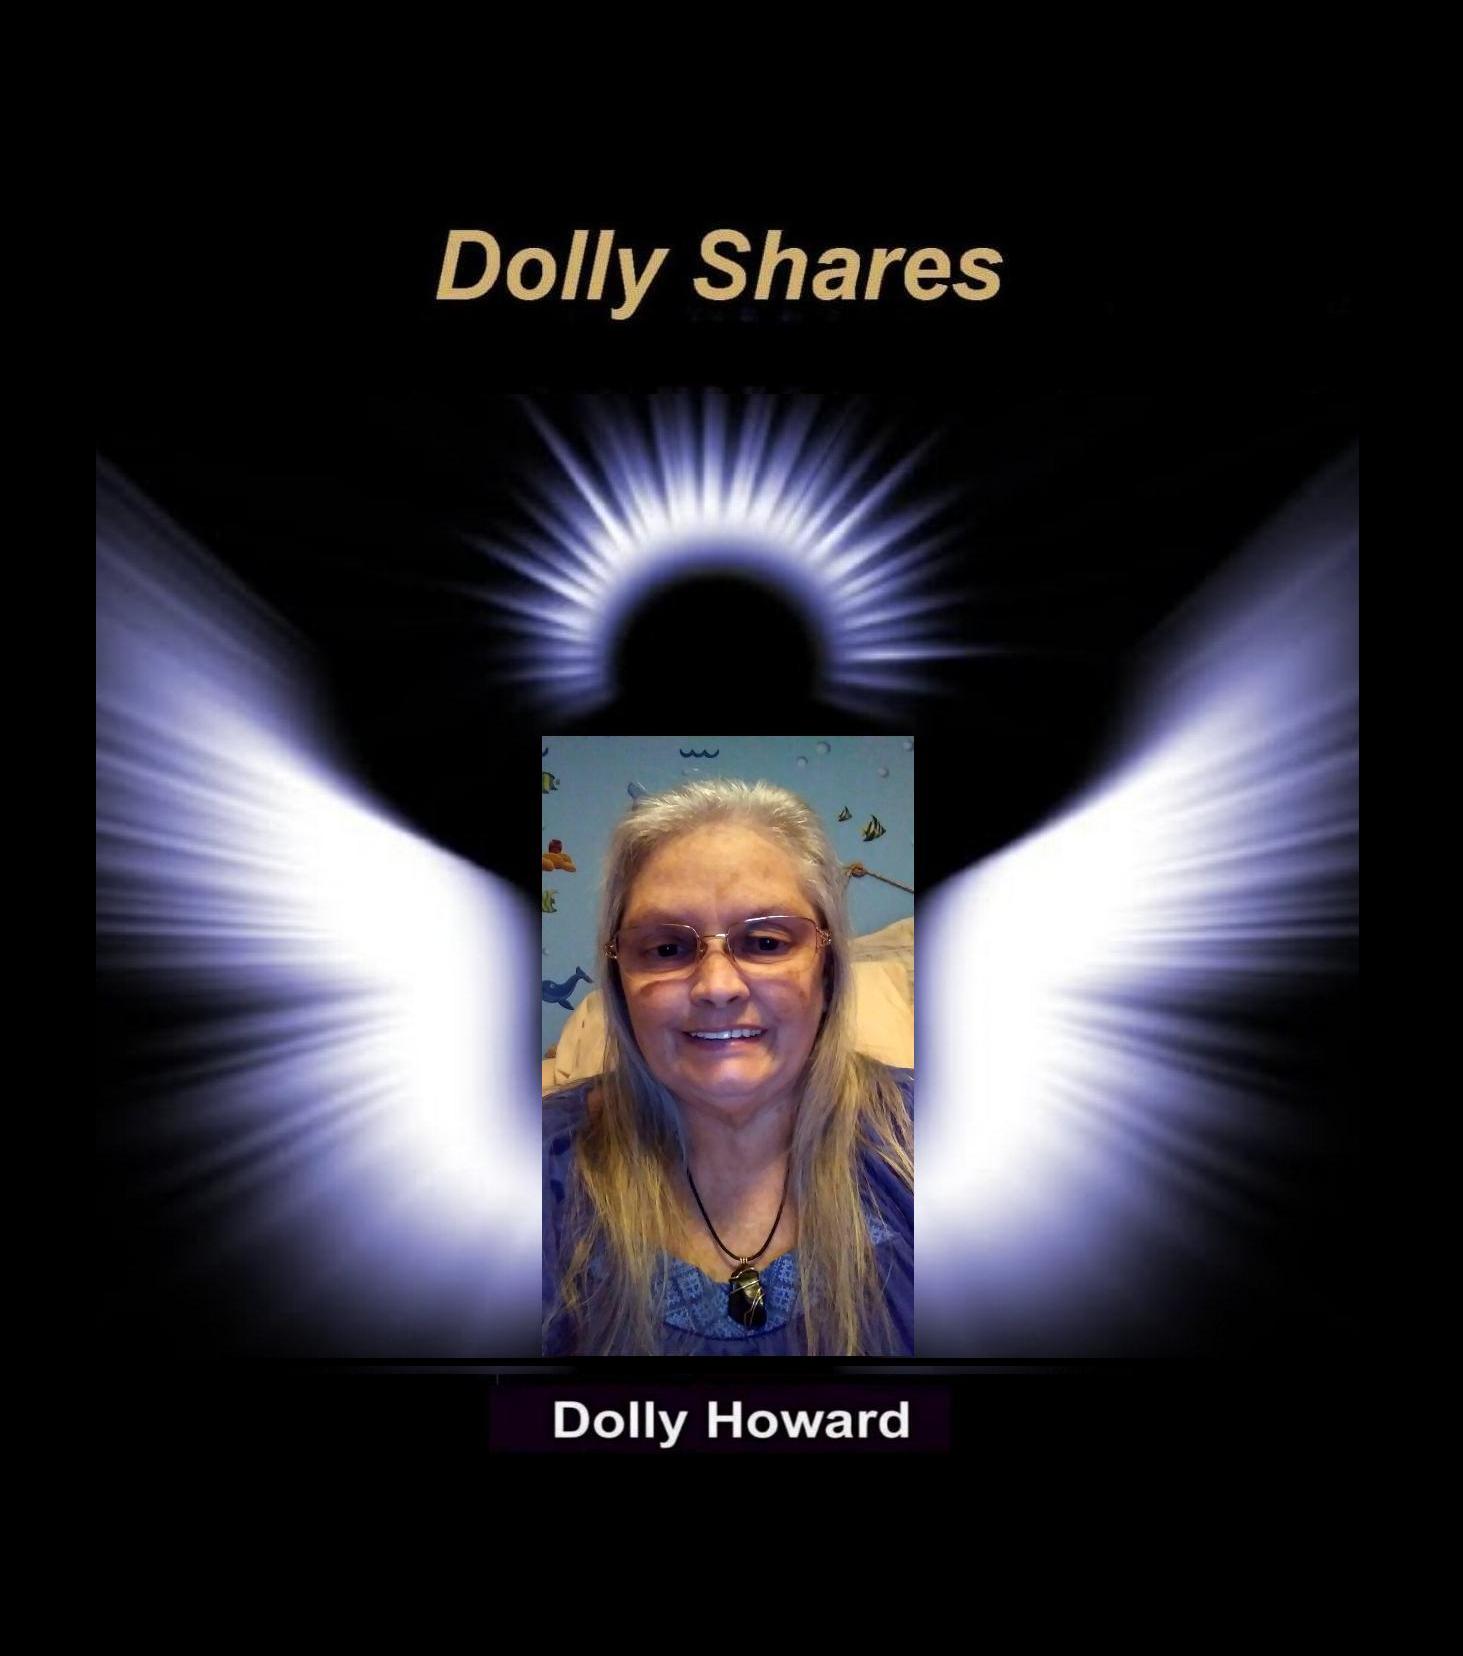 DOLLY SHARES - Dolly Howard on "My Thoughts" from 6-17-20